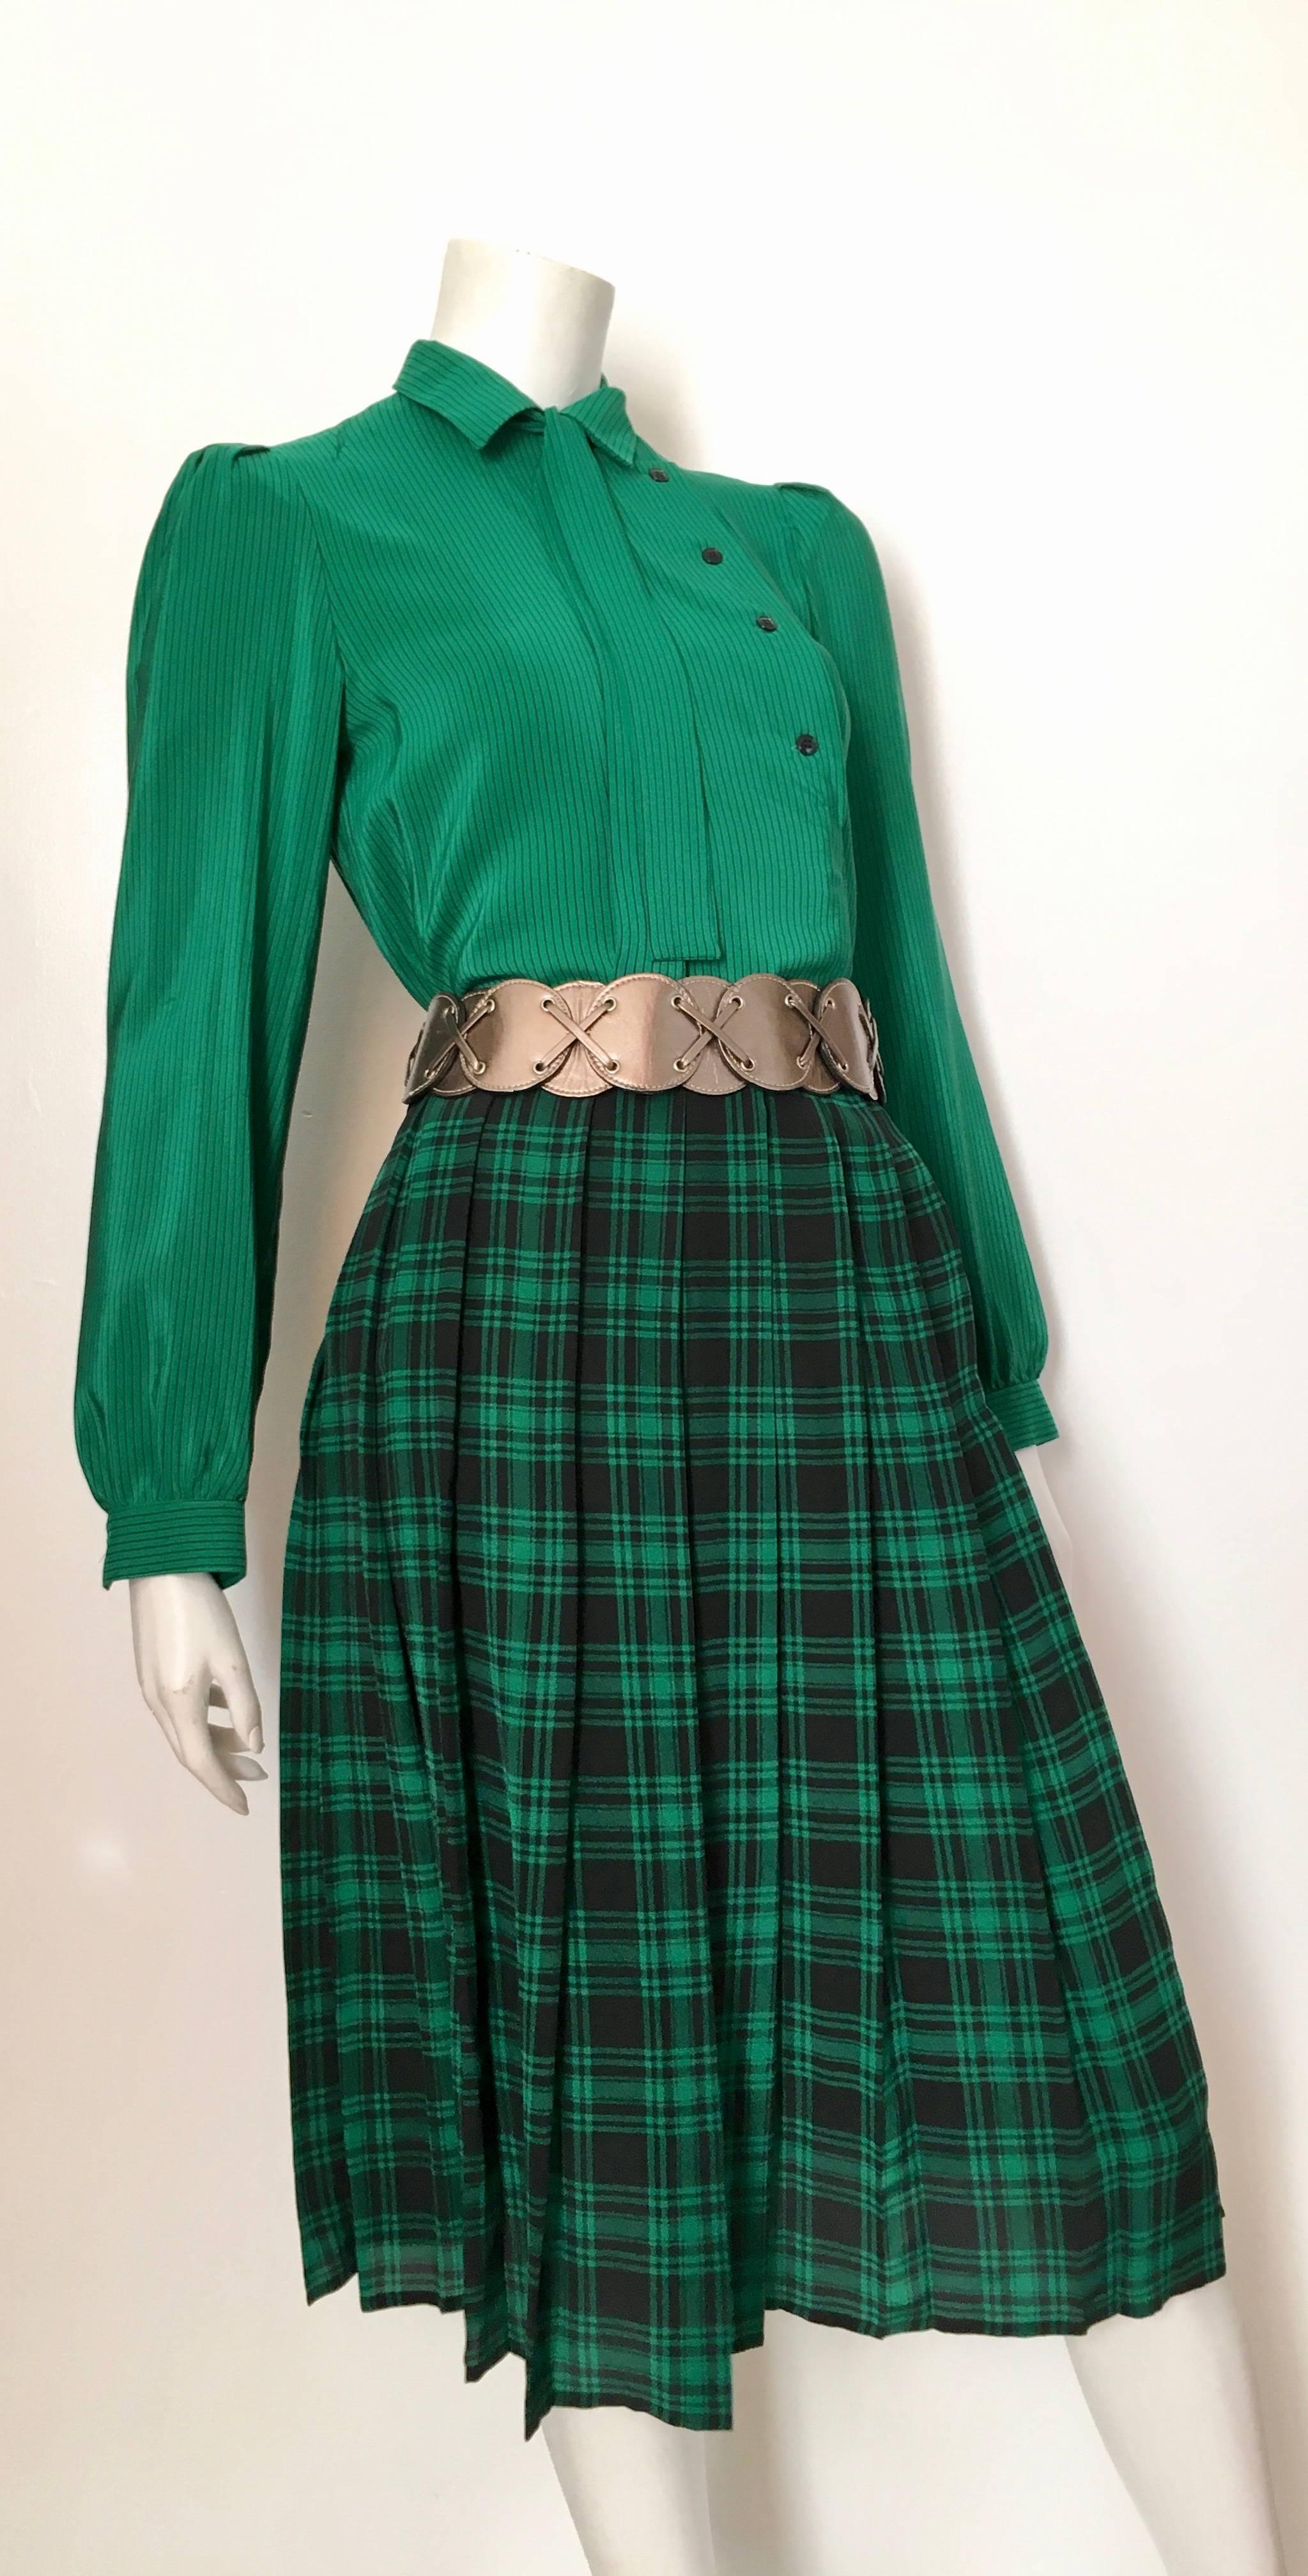 Oscar de la Renta Miss O 1980s green silk pin striped blouse with plaid pleated skirt is marked as a size 6 but fits like a modern size 4. Ladies please grab your tape measure so you can measure your bust, waist, hips, sleeves to make certain this